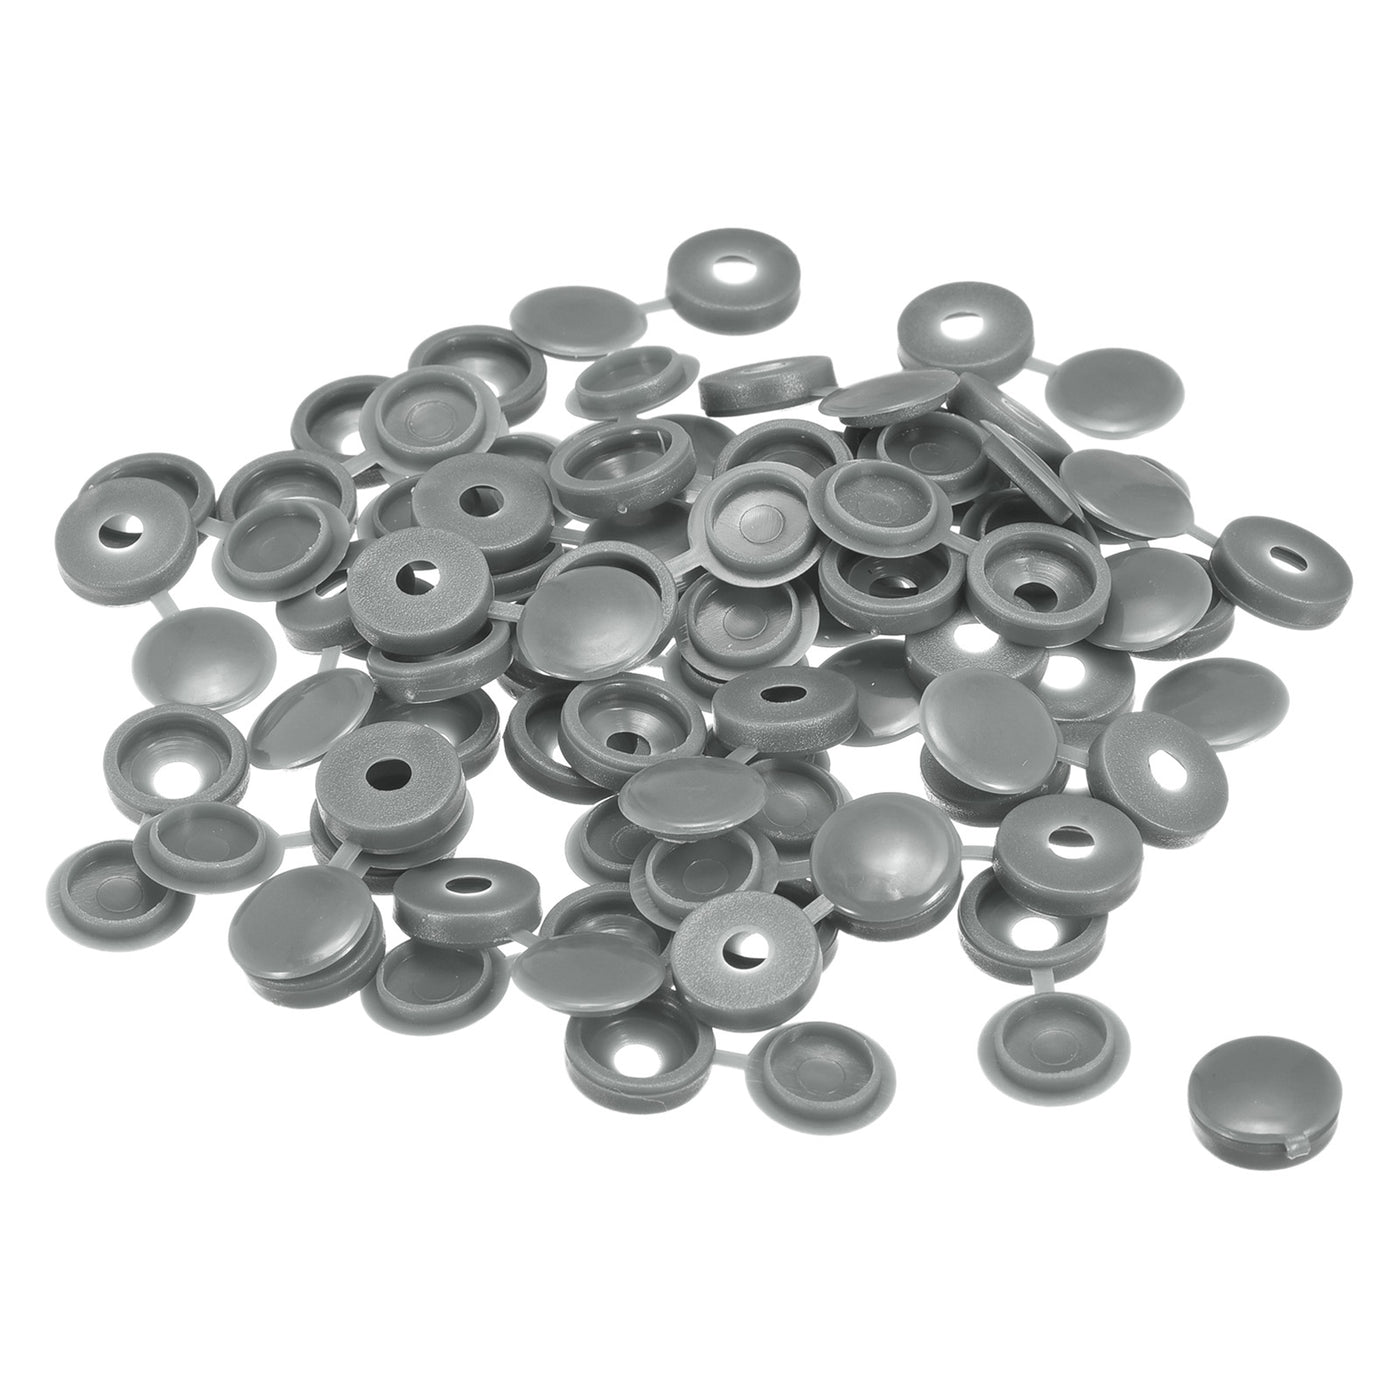 uxcell Uxcell 150Pcs 4mm Hinged Screw Cover Caps Plastic Fold Screw Snap Covers, Gray